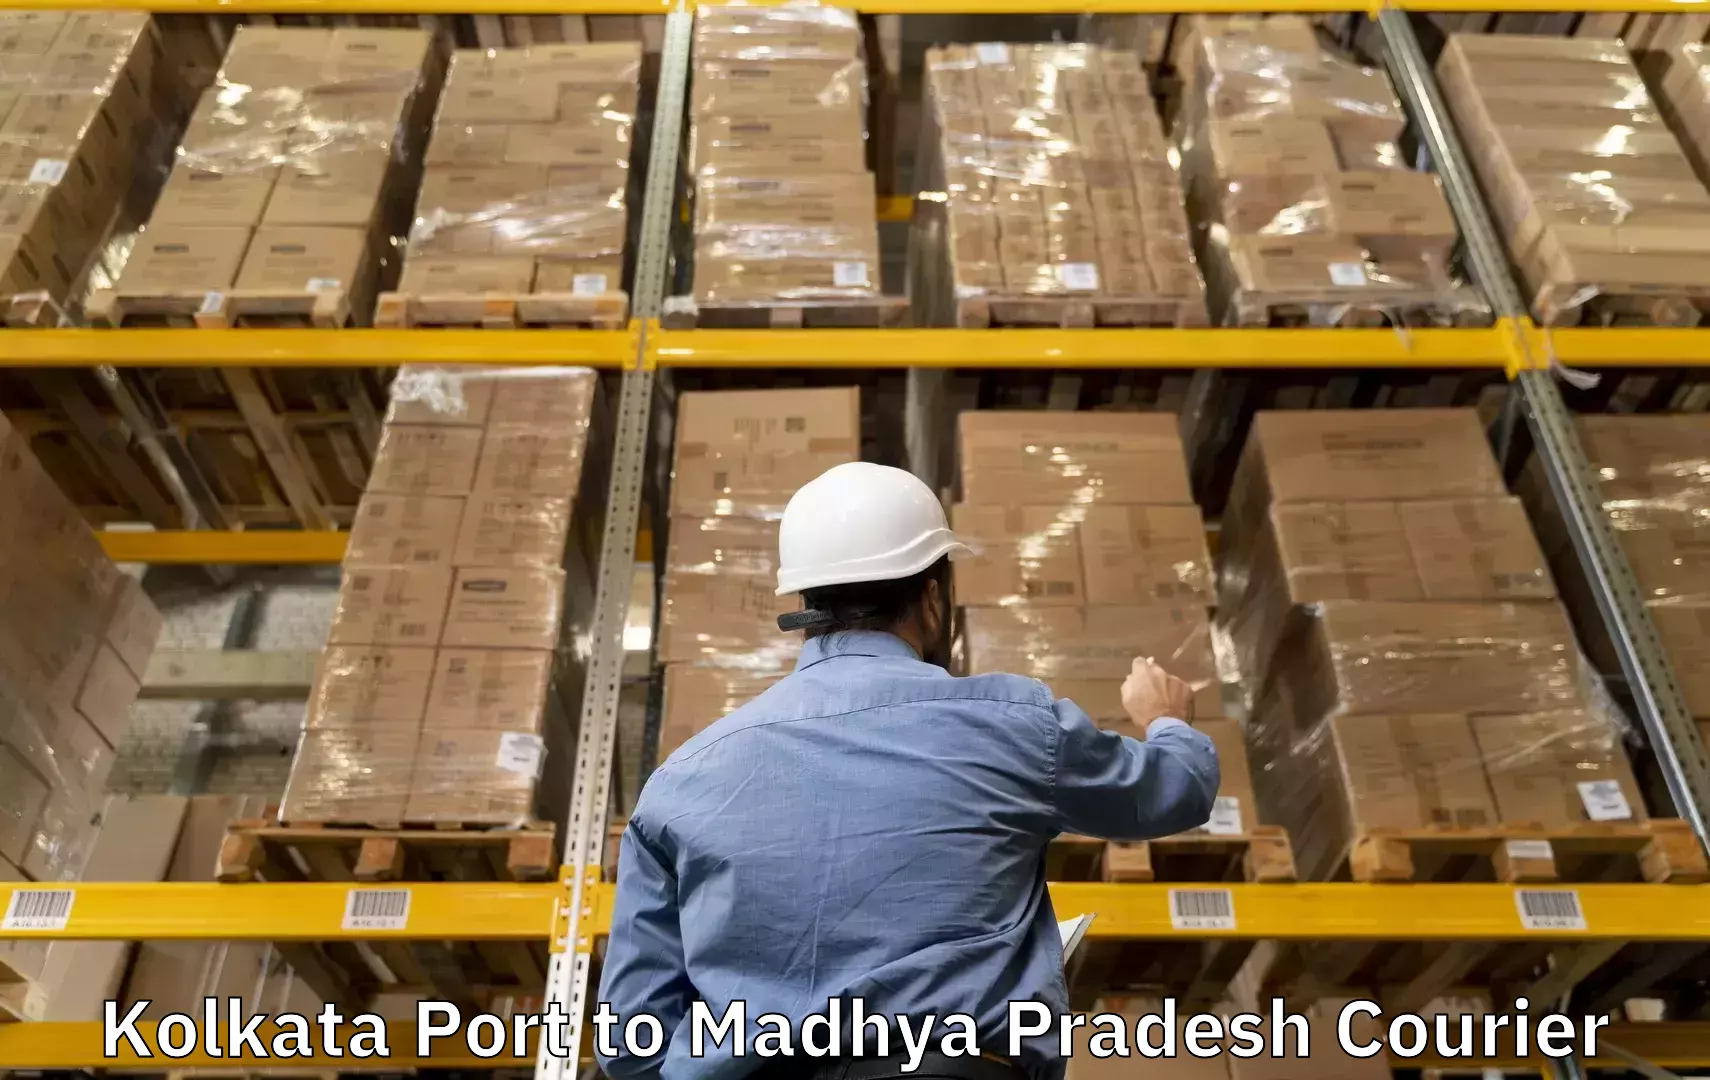 Luggage shipping planner in Kolkata Port to Sehore